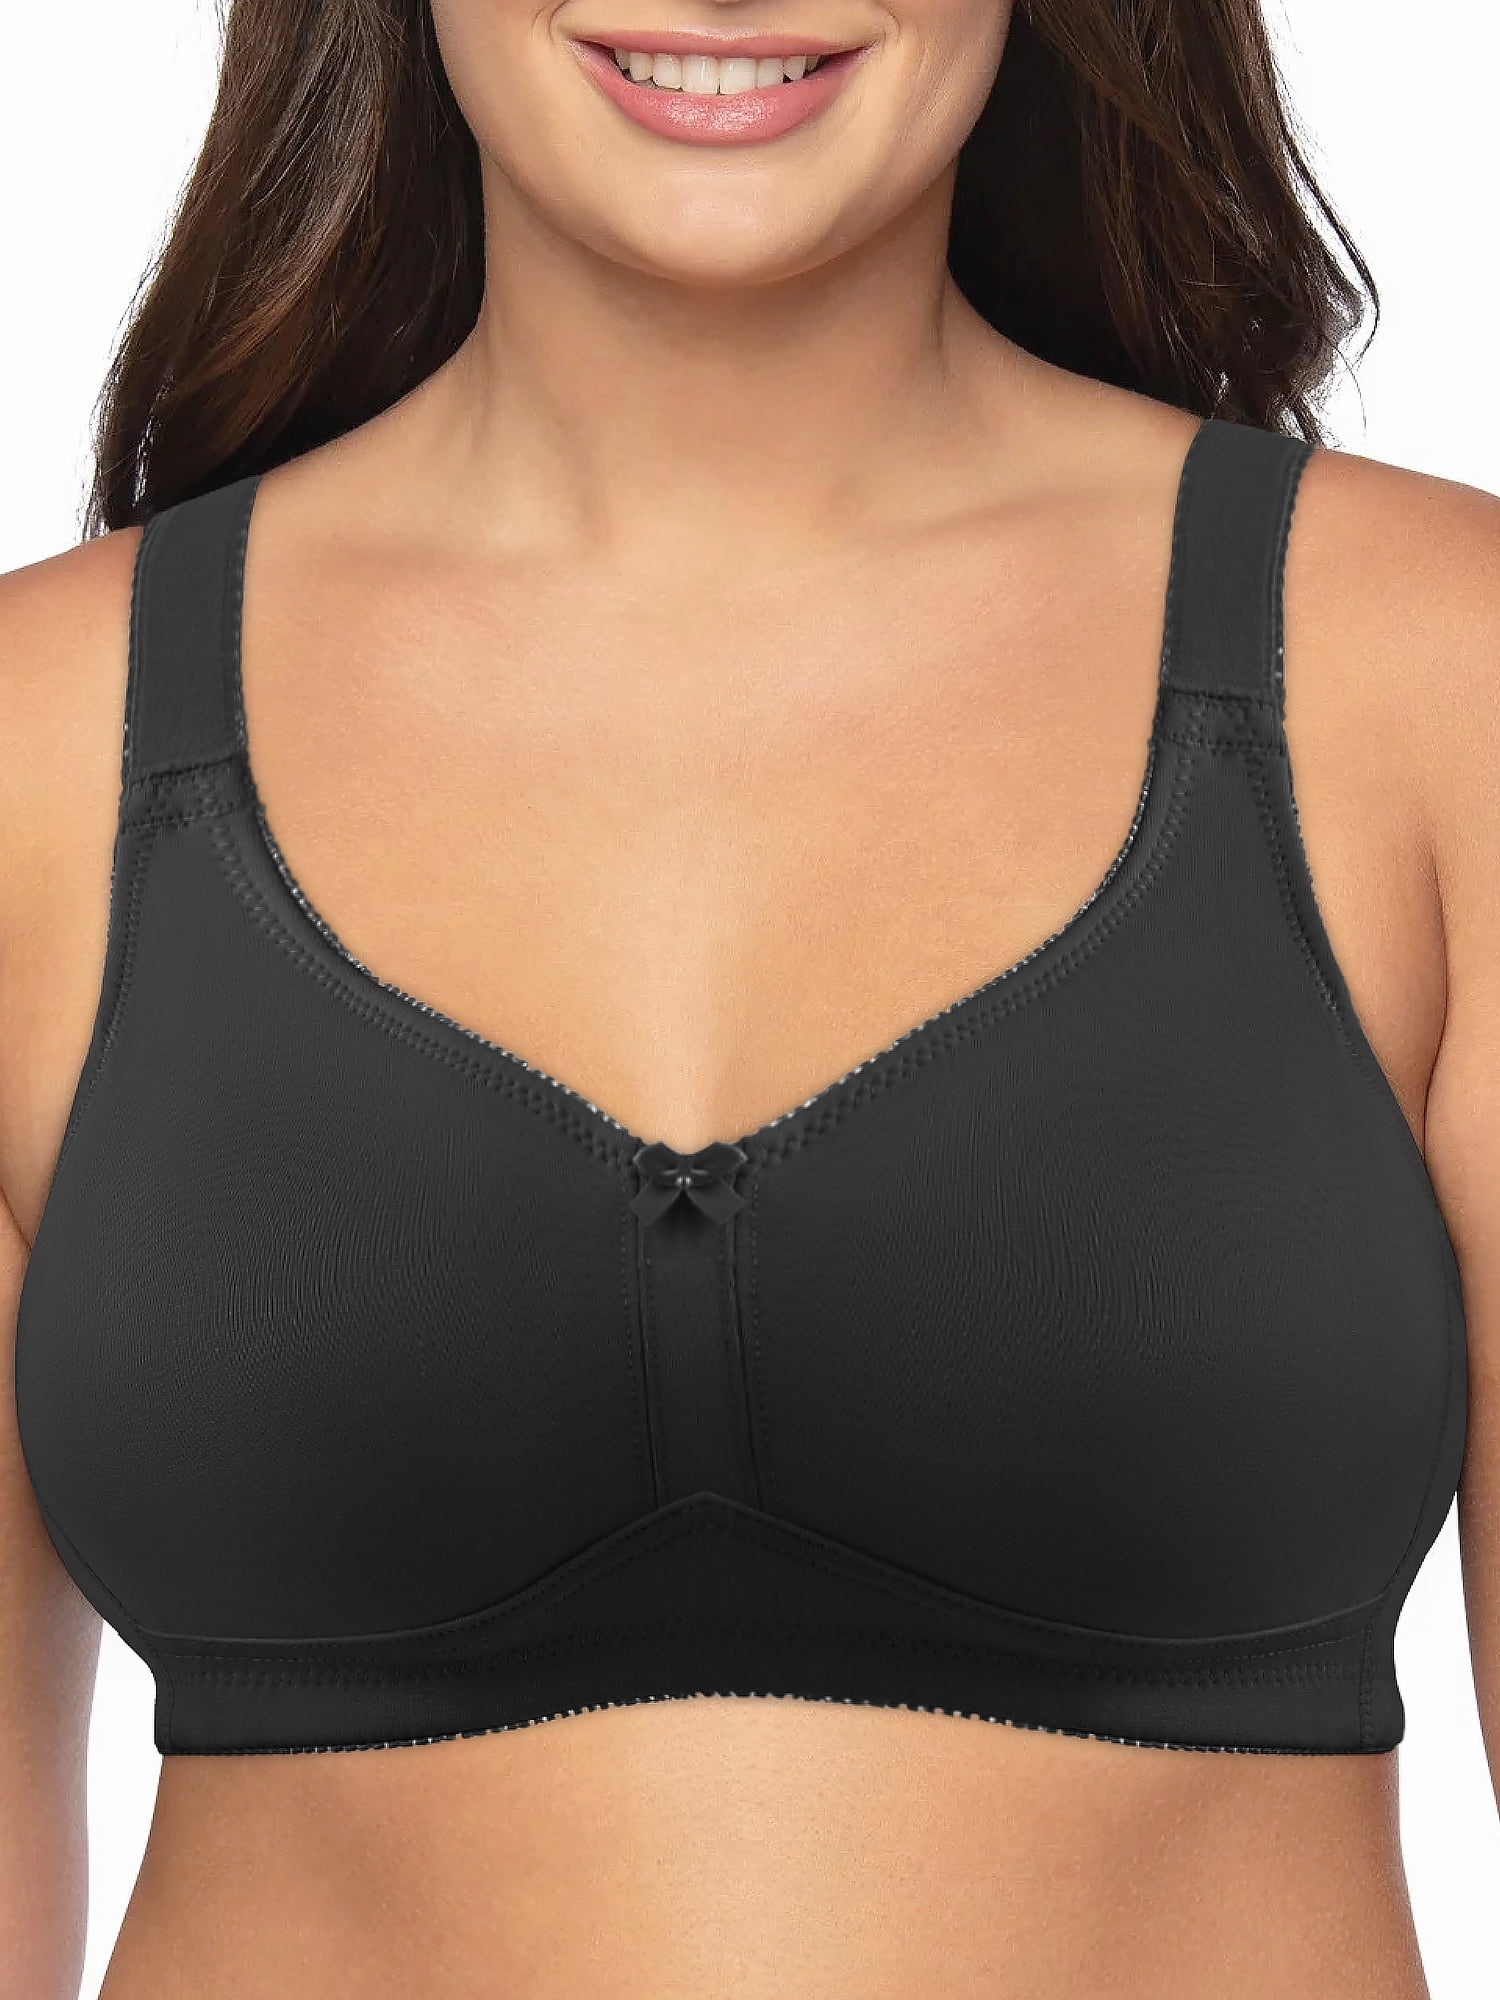 AILIVIN Wireless Bras For Women Comfort Surgery Bra With Adjustable Straps  Great Support Comfort Women Bras No Wire Bras Lift Up Bras Full Coverage  Soft Compression Bra Black 36B 